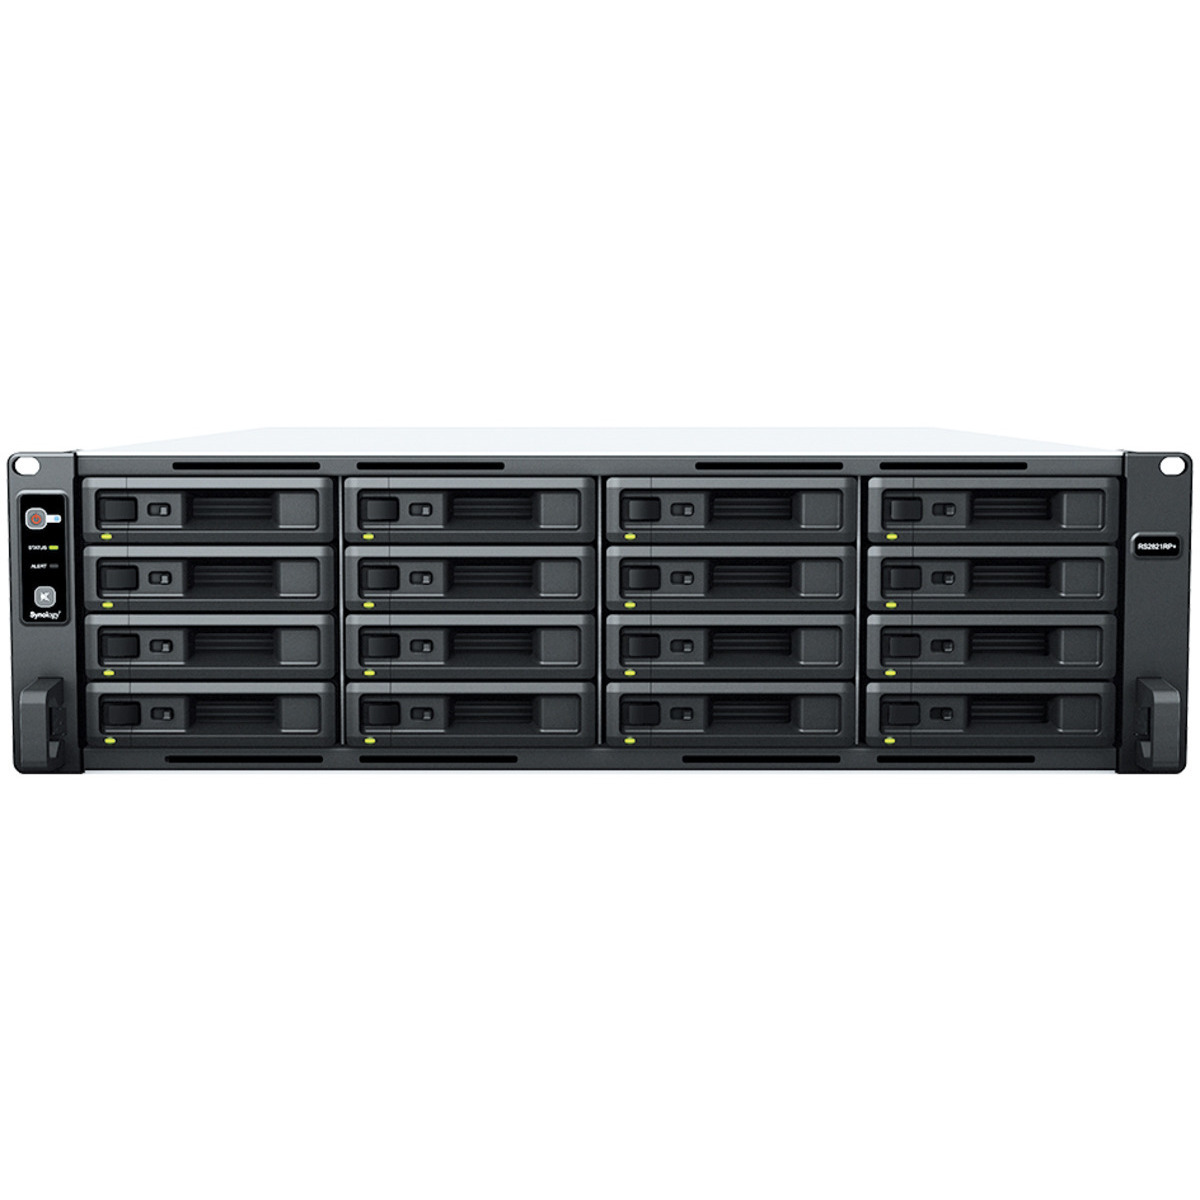 buy $5016 Synology RackStation RS2821RP+ 32tb RackMount NAS - Network Attached Storage Device 16x2000gb Seagate BarraCuda ST2000DM008 3.5 7200rpm SATA 6Gb/s HDD CONSUMER Class Drives Installed - Burn-In Tested - ON SALE - nas headquarters buy network attached storage server device das new raid-5 free shipping usa christmas new year holiday sale RackStation RS2821RP+